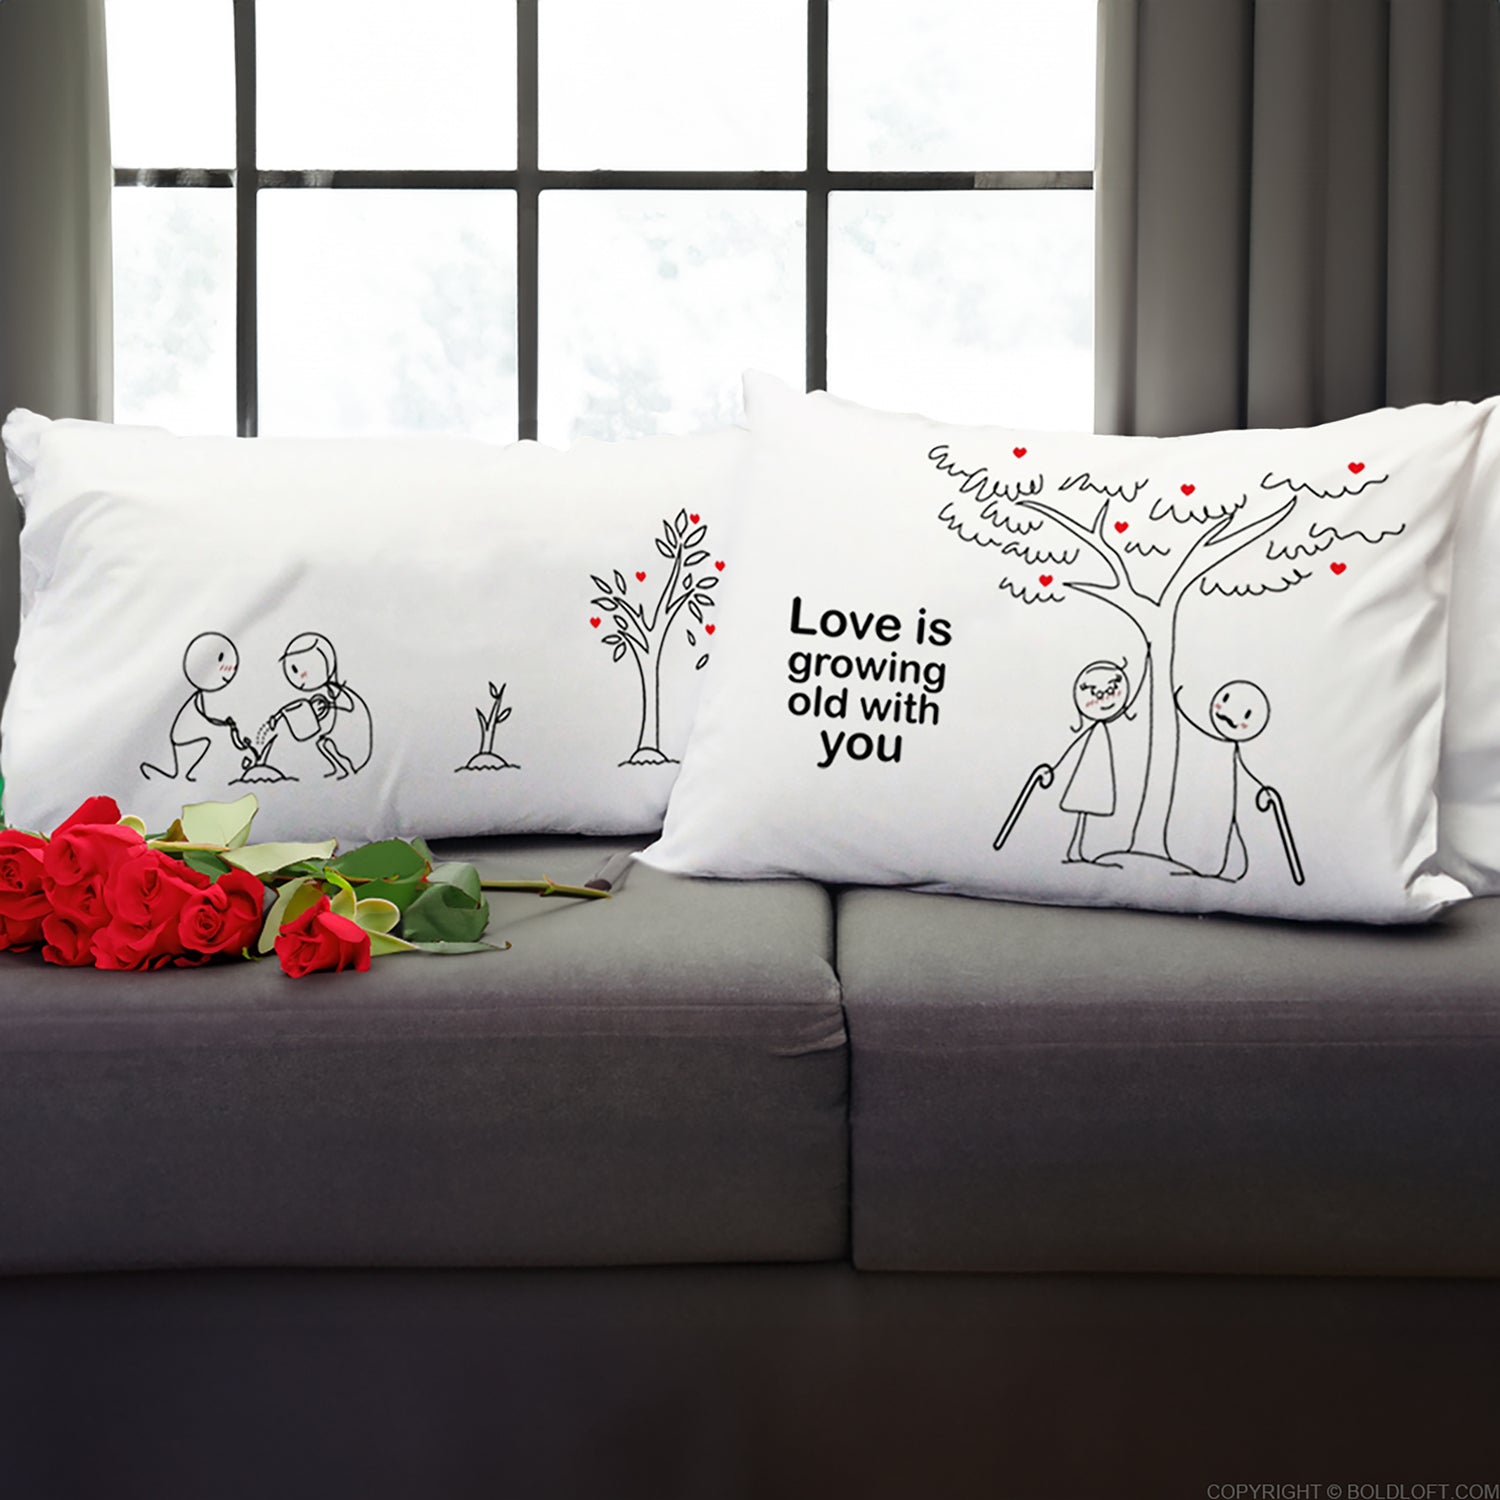 BoldLoft Grow Old with You Couple Pillowcases, feature a love quote and 2 cute stick figures